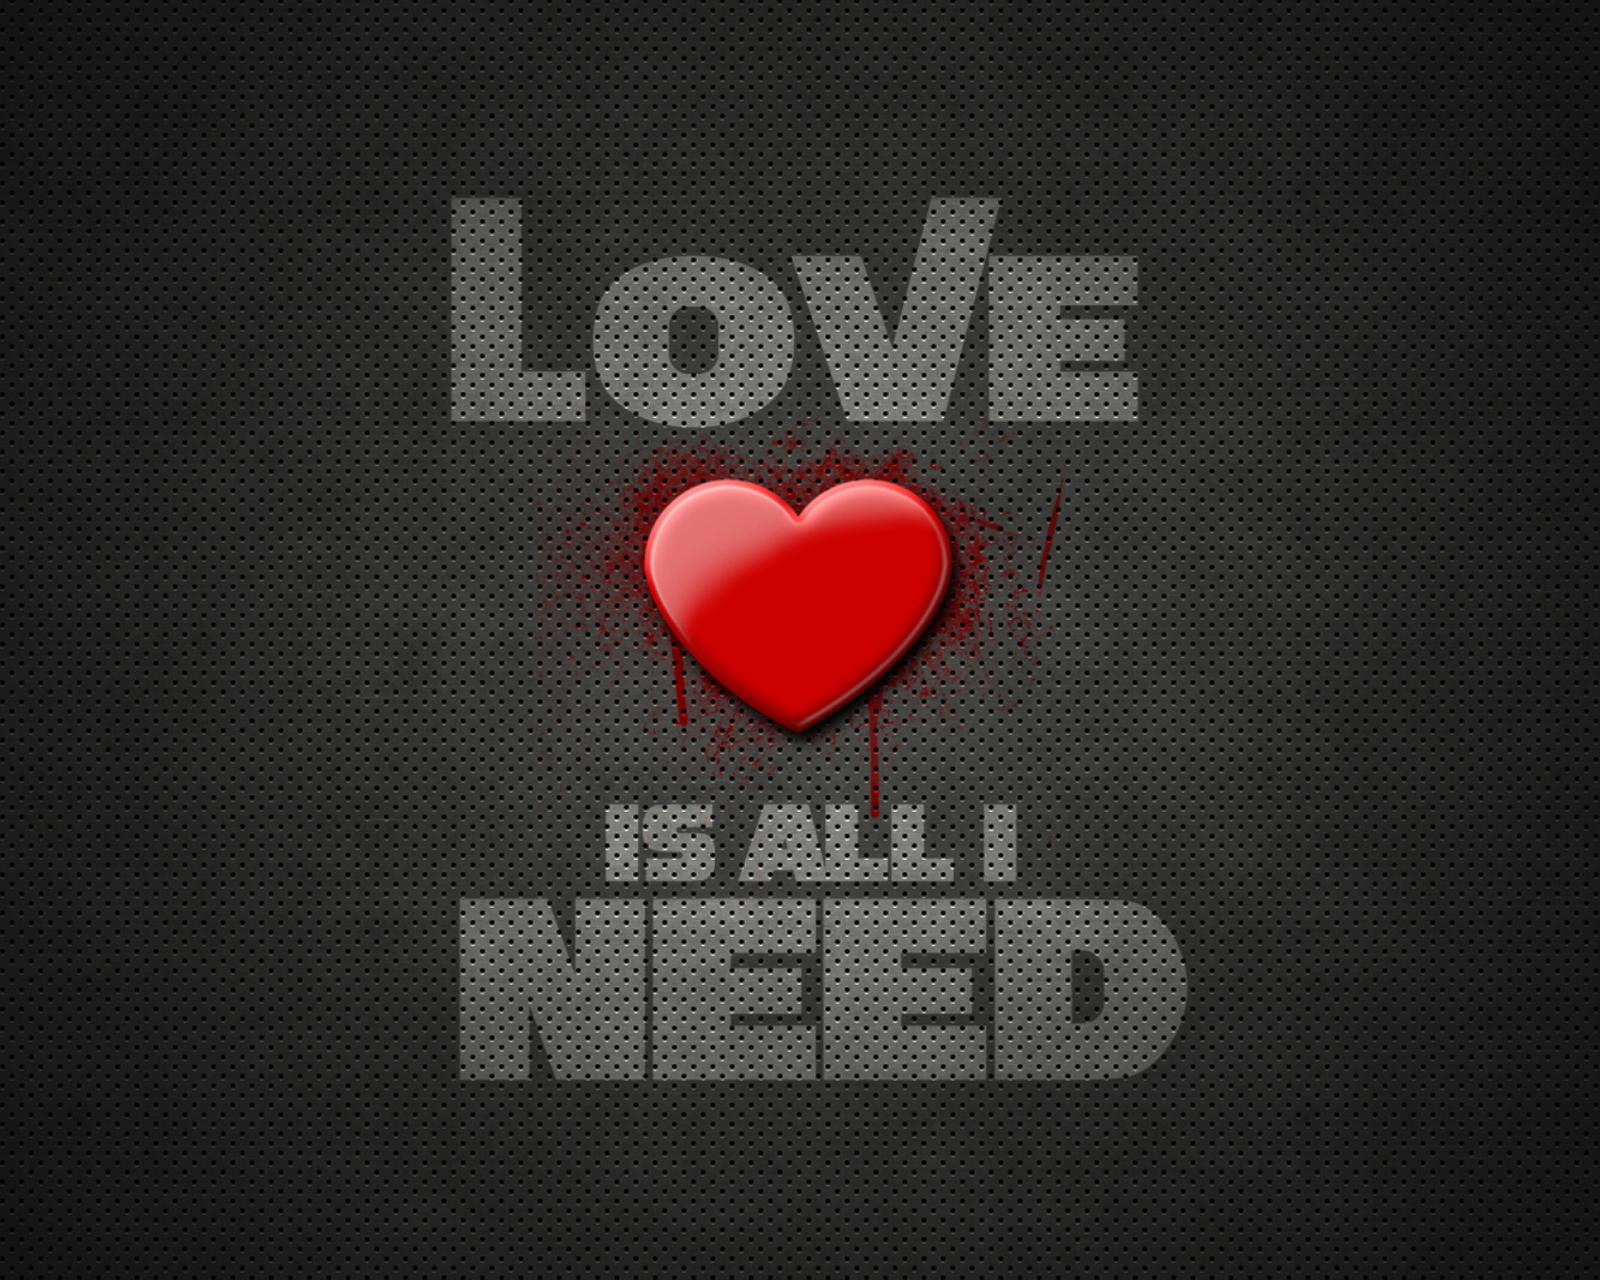 Love Is All I Need wallpaper 1600x1280